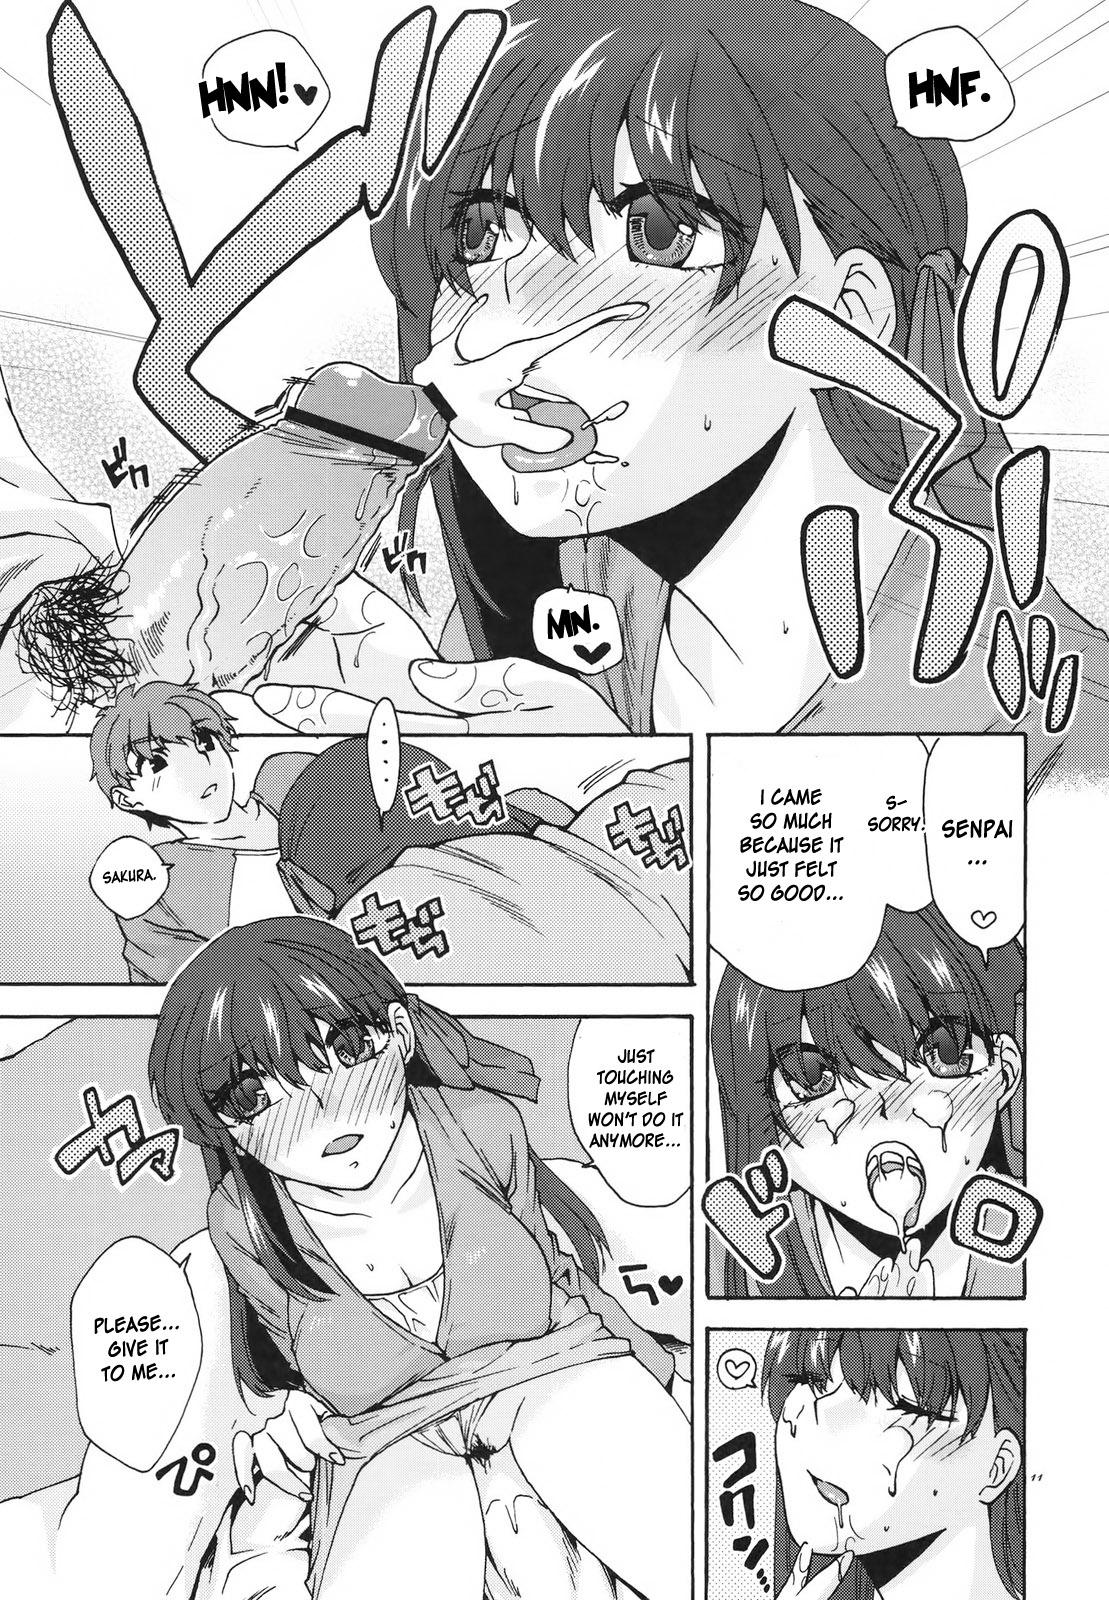 Brasil Crime and Affection - Fate stay night Nylons - Page 11